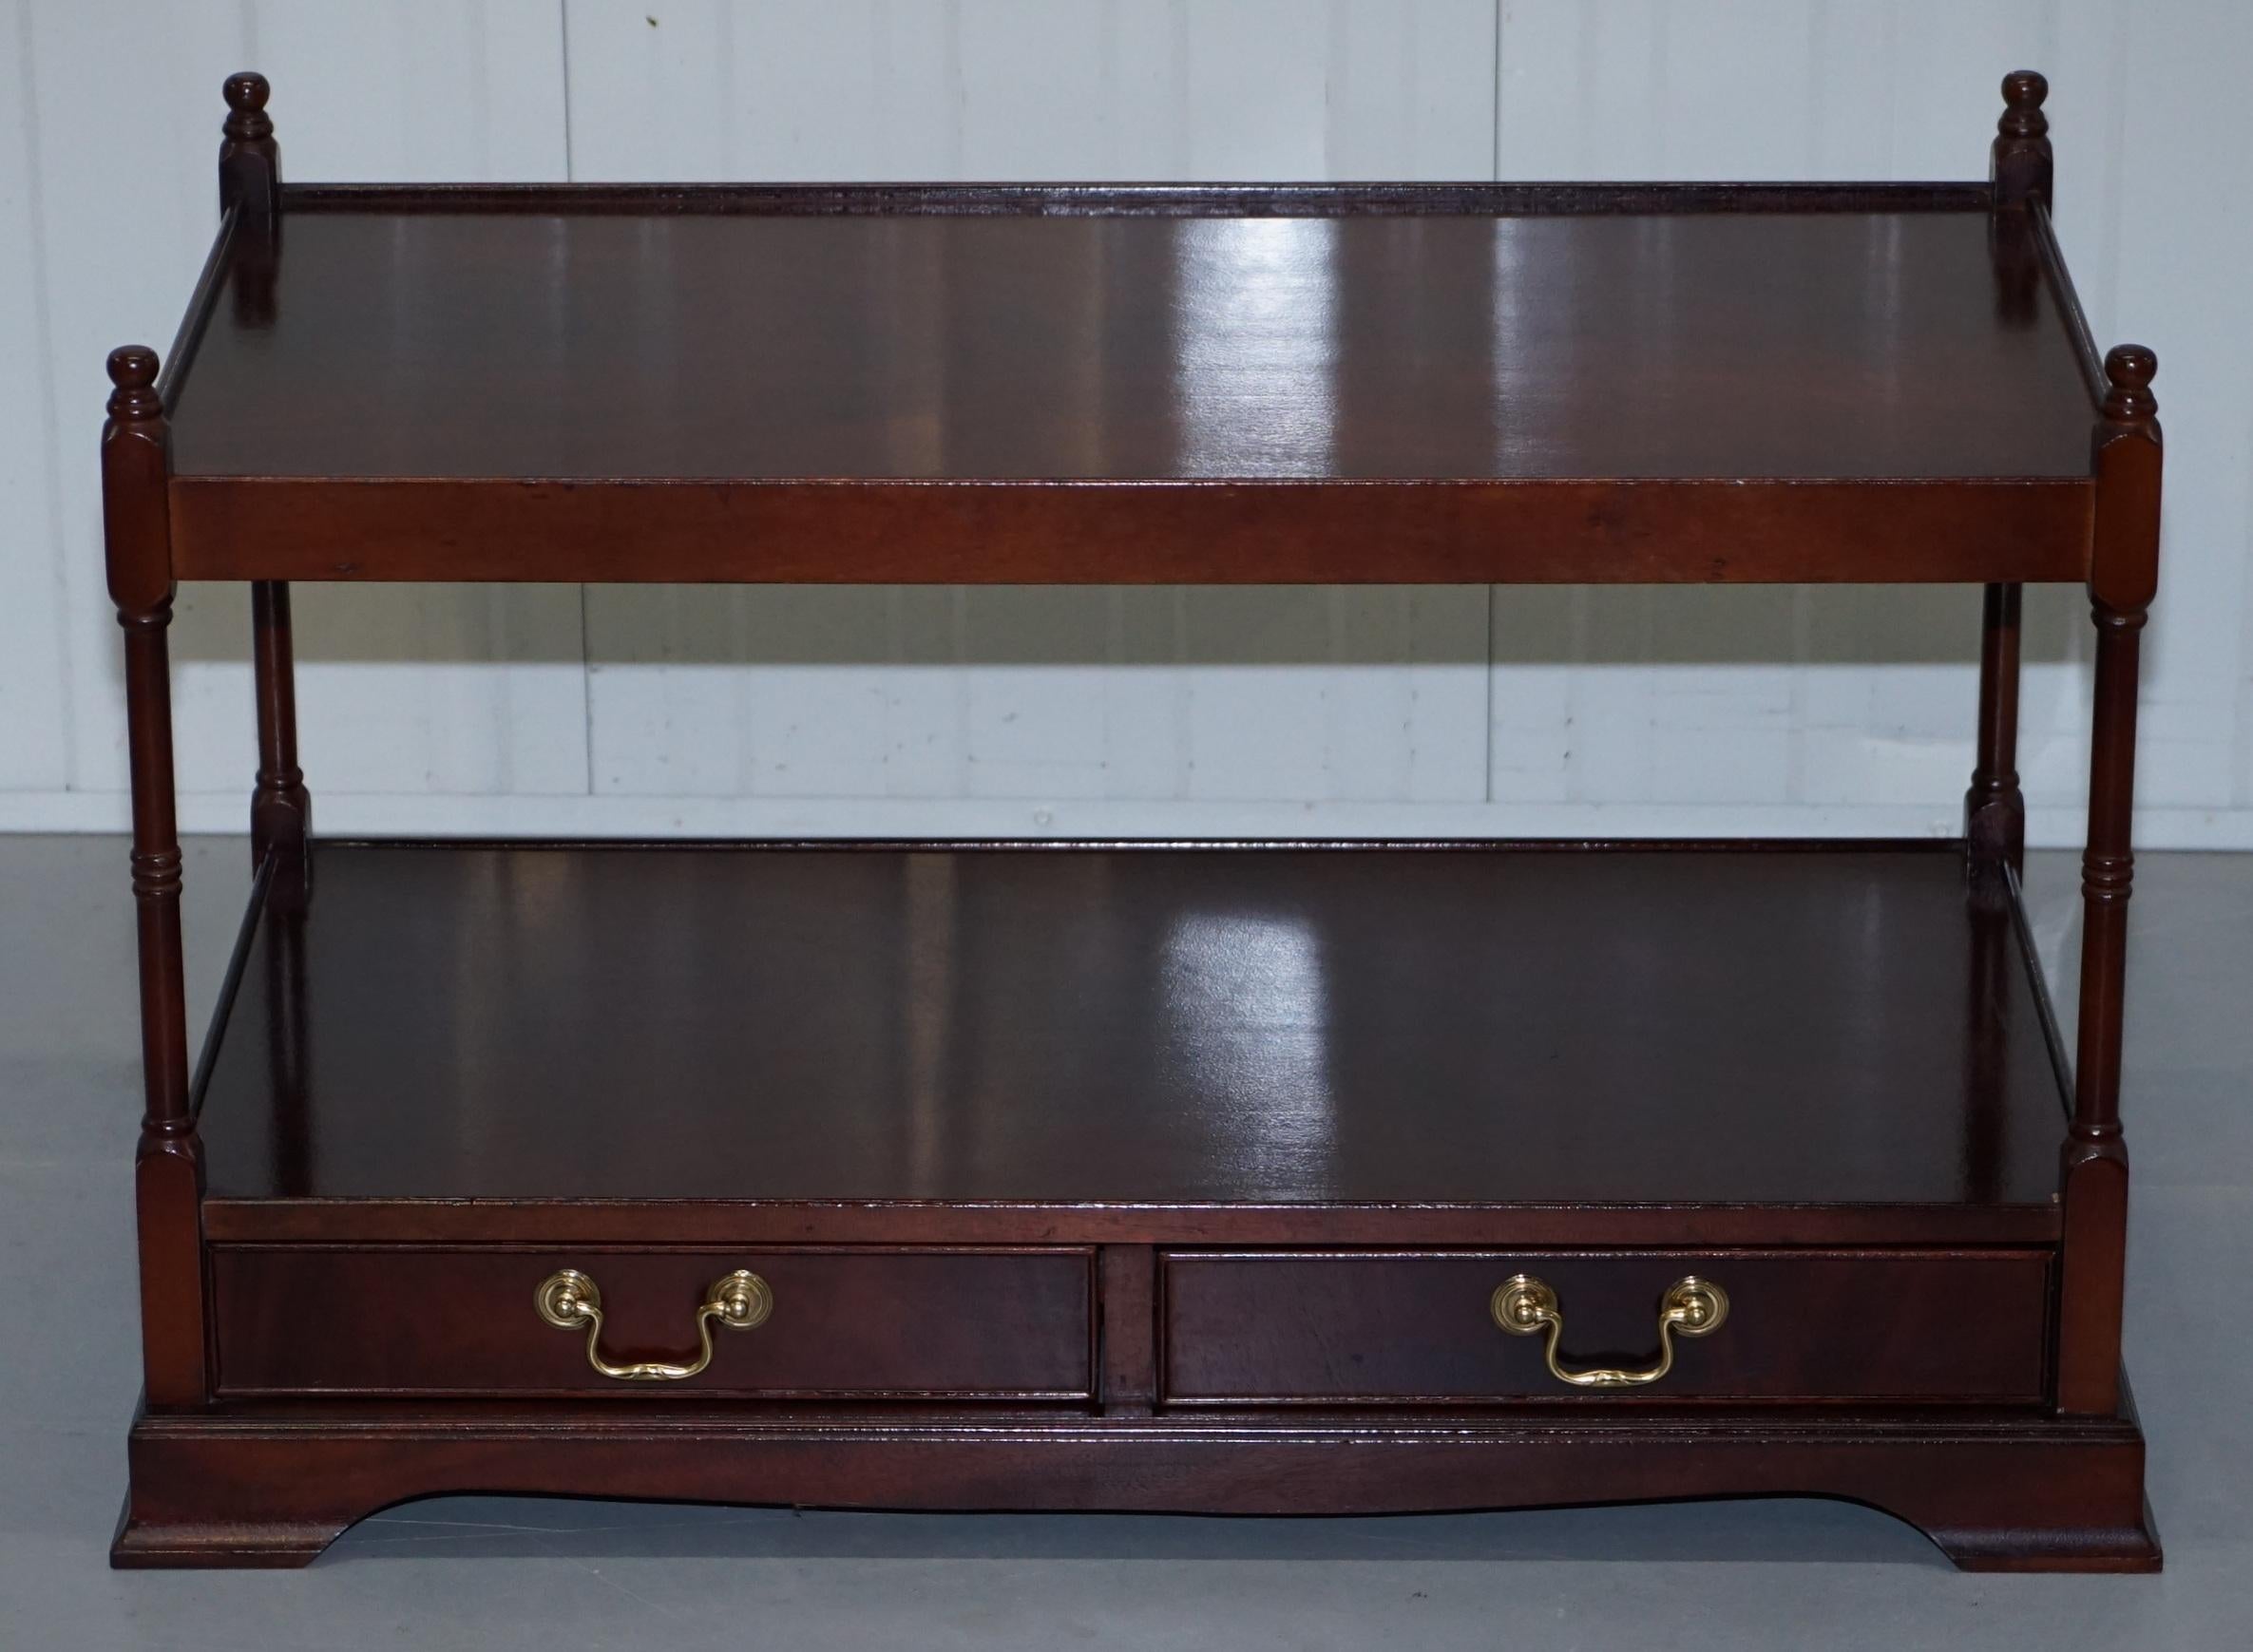 We are delighted to offer for sale this nice mahogany Tv entertainment stand

A good looking and a well made decorative piece of furniture, as you can see it can be used as a media stand or simply for placing decorative objects on

The piece has